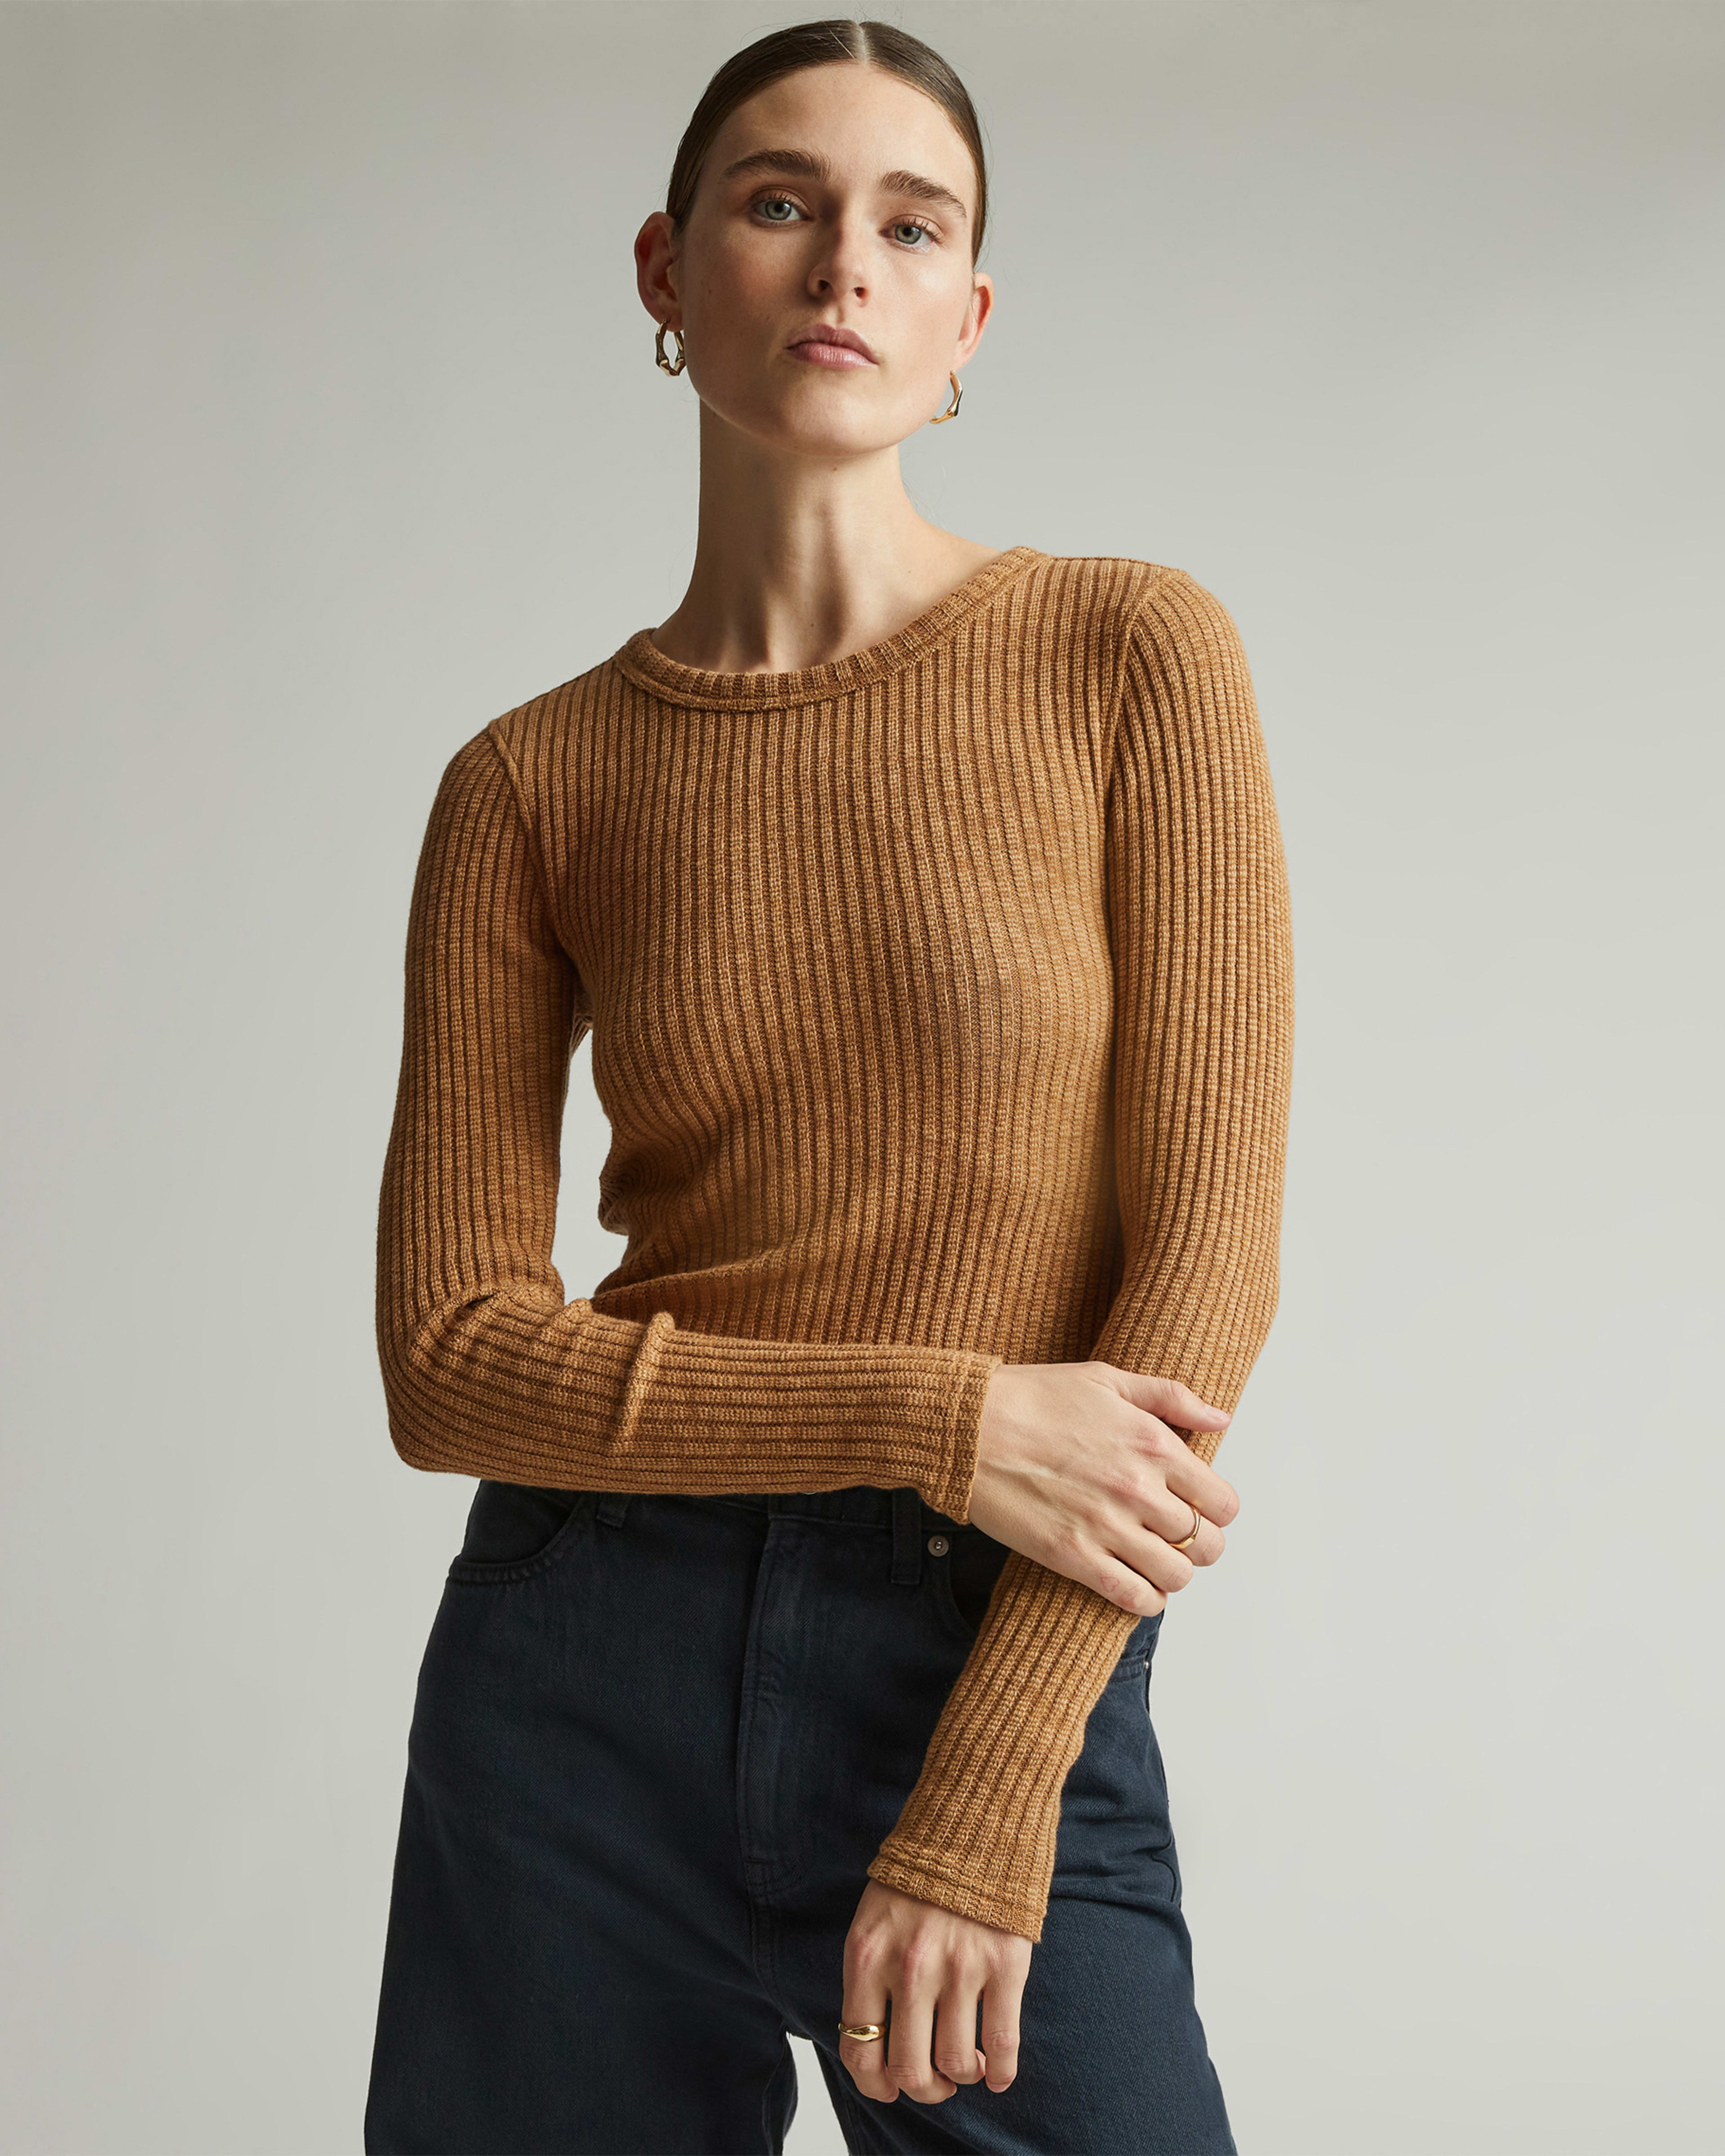 Rib Knit Leggings  Haven Well Within